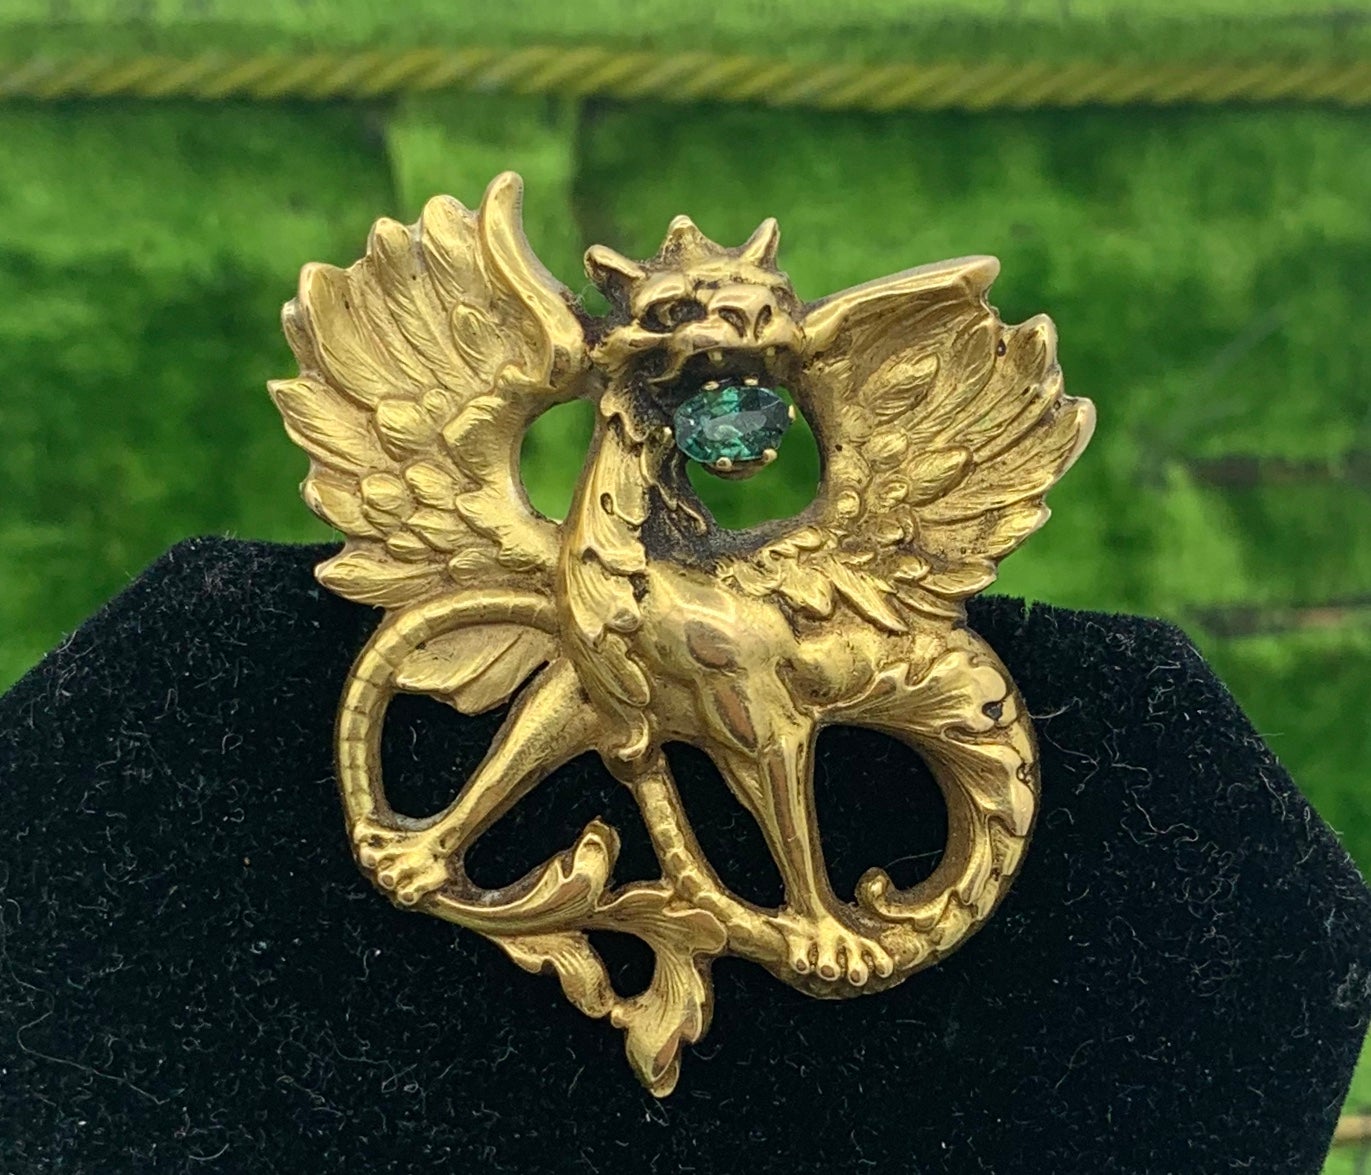 THIS IS A STUNNING MUSEUM QUALITY FRENCH BEAUX ARTS RENAISSANCE REVIVAL 18 KARAT GOLD PENDANT OR BROOCH OF A GRIFFIN OR DRAGON HOLDING A STUNNING ANTIQUE GREEN DEMANTOID GARNET IN THE MOUTH.
This is a beautiful Beaux Arts - Art Nouveau - Belle